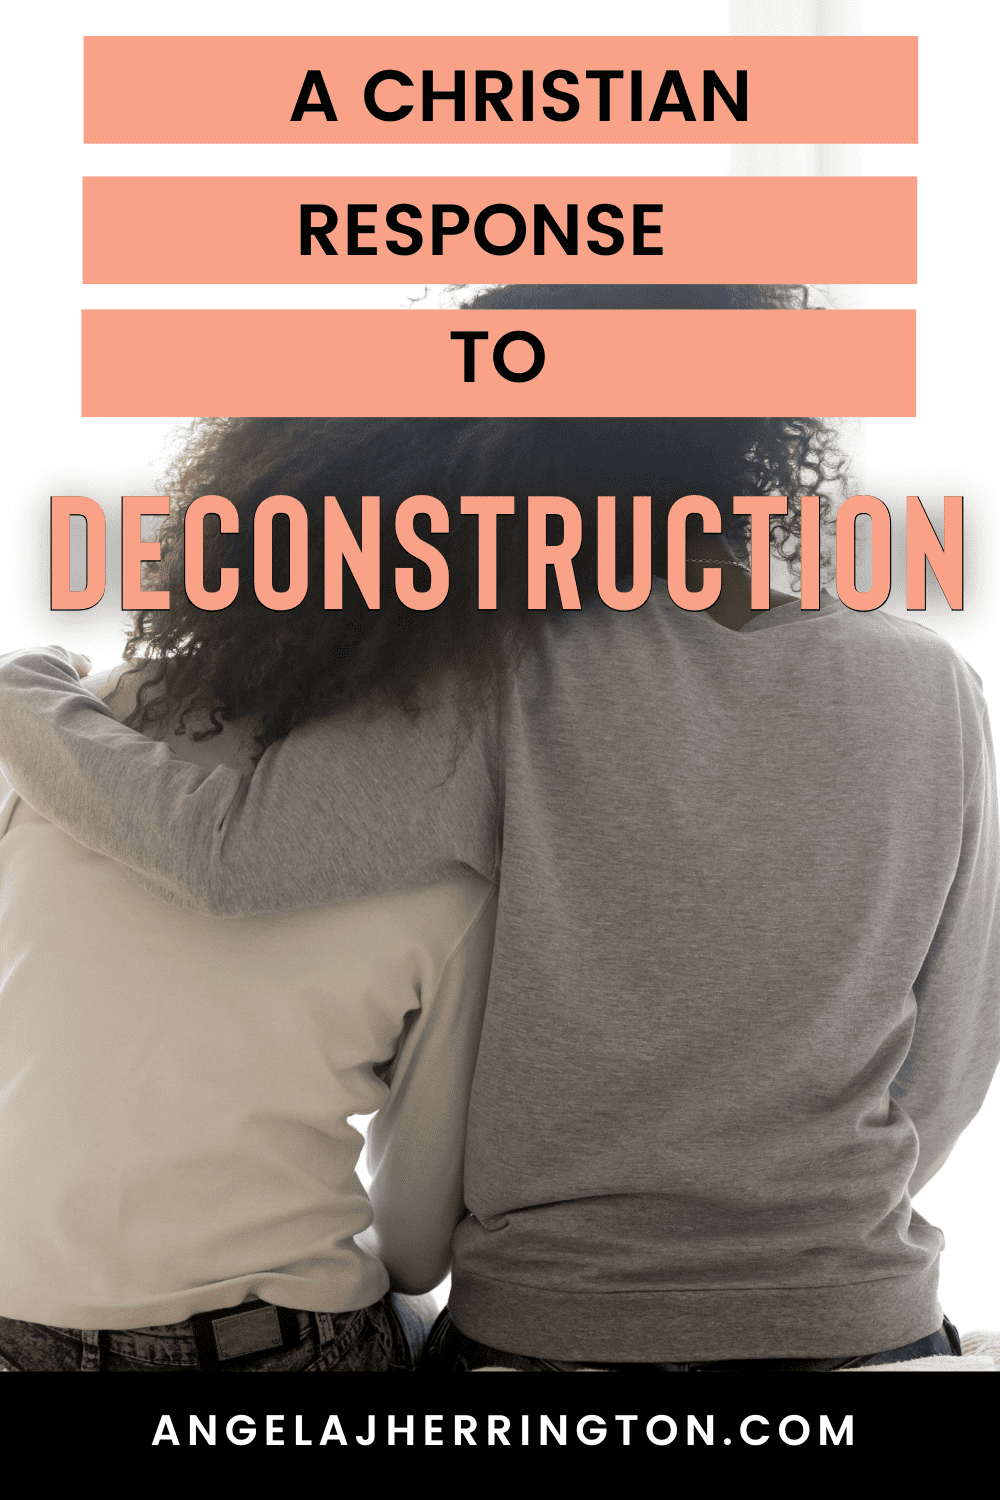 A Christian response to deconstruction how to deconstruct your faith